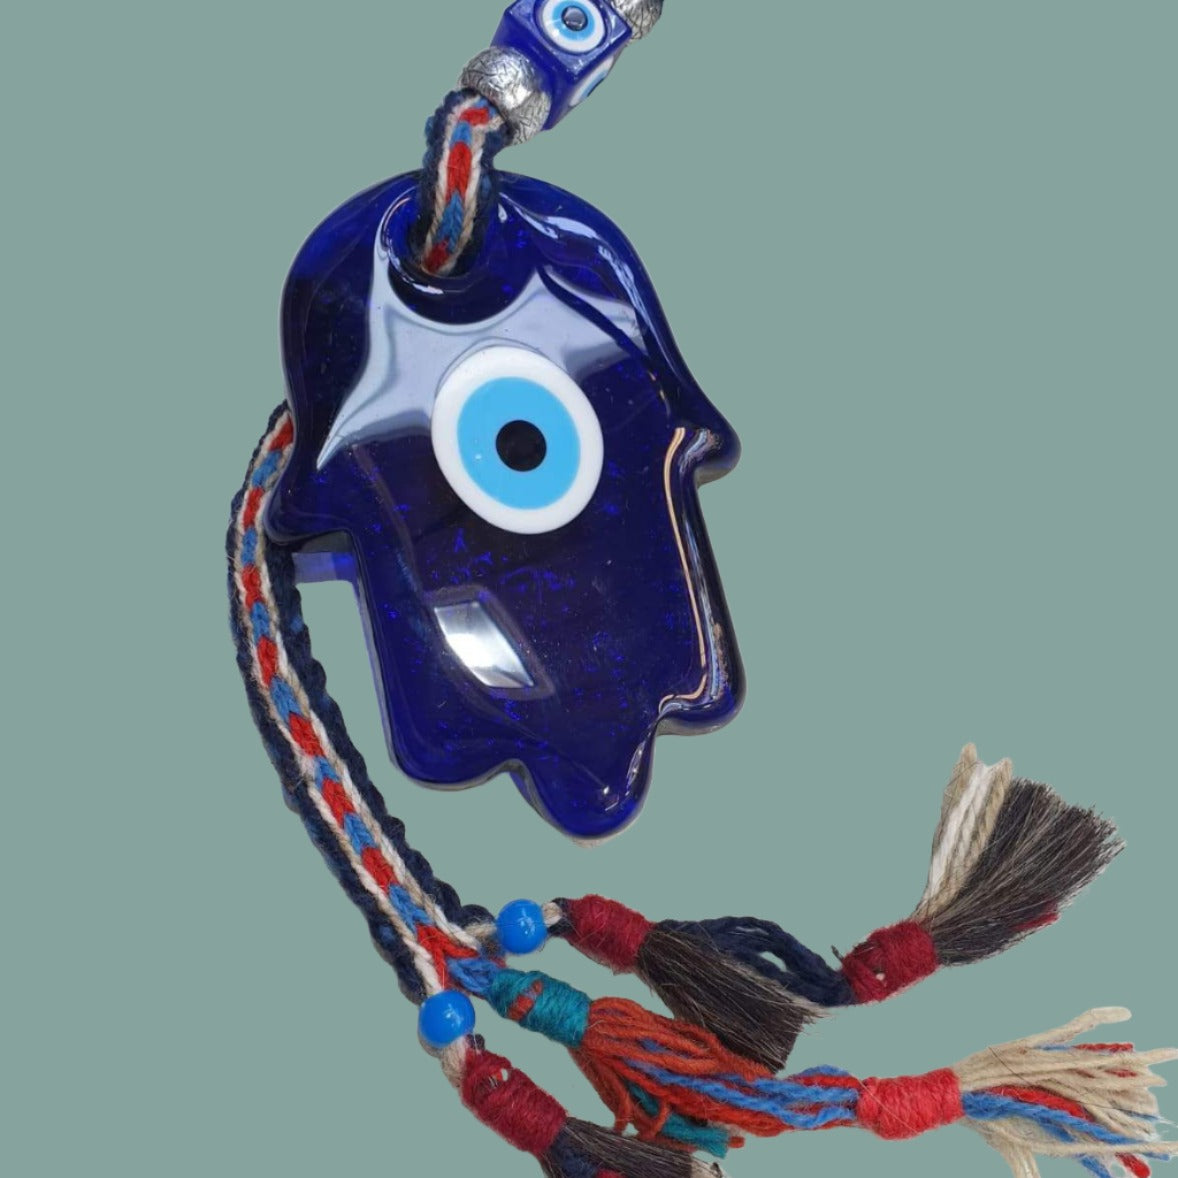 Bluenoemi Jewelry wall hangings 1 Glass Hamsa Souvenir Luck and Blue Eyes Symbols on a colourful rope.